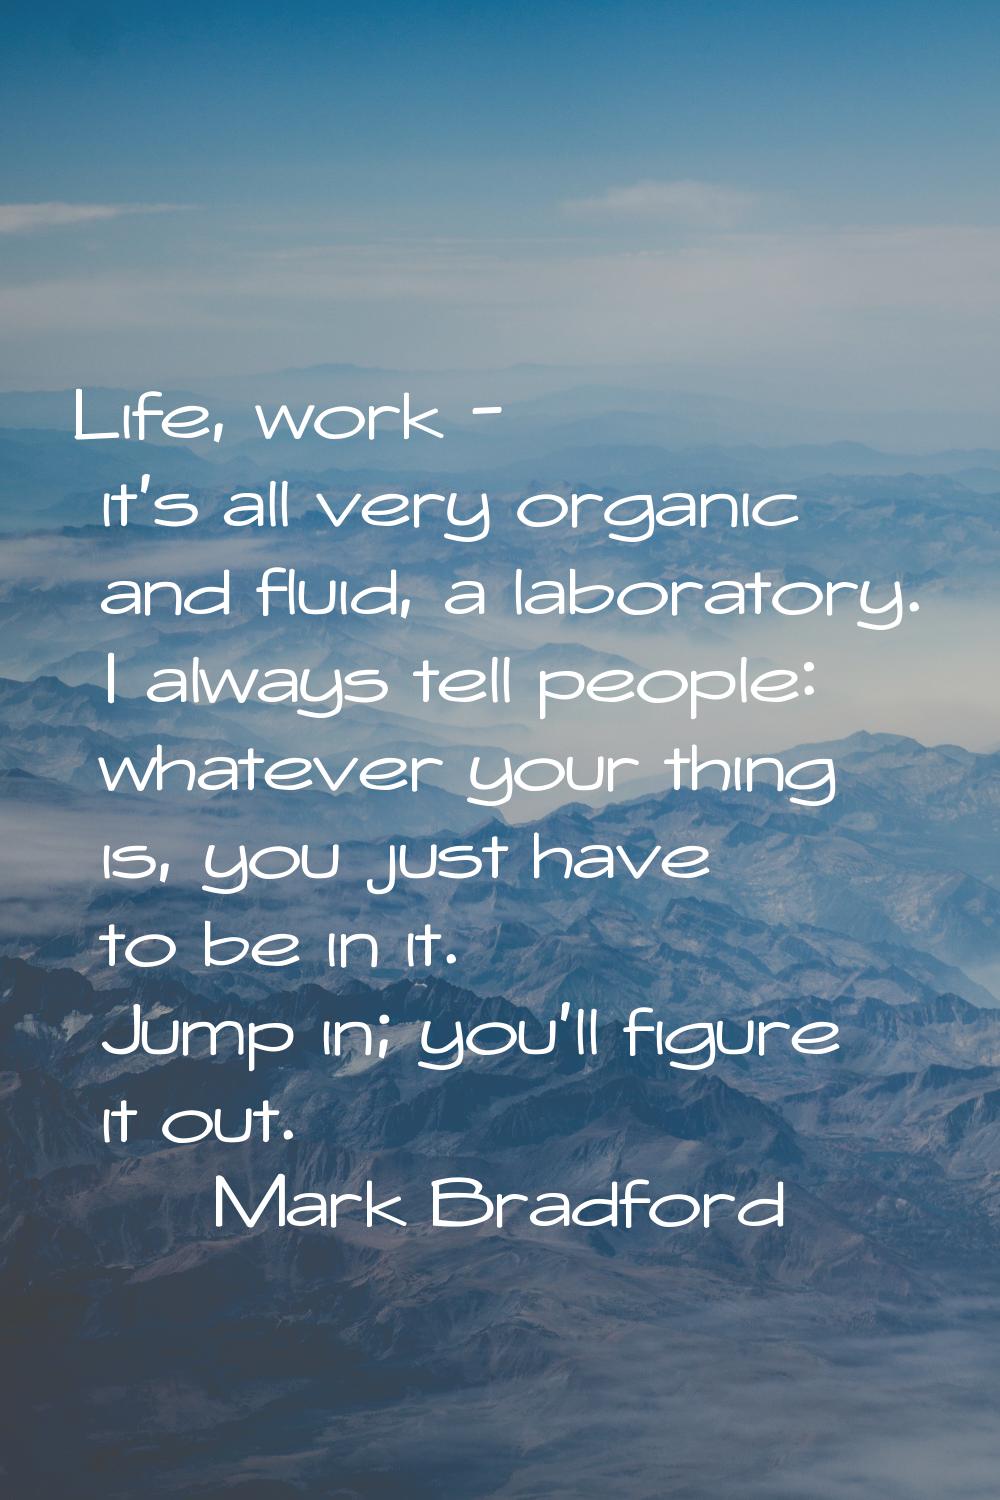 Life, work - it's all very organic and fluid, a laboratory. I always tell people: whatever your thi